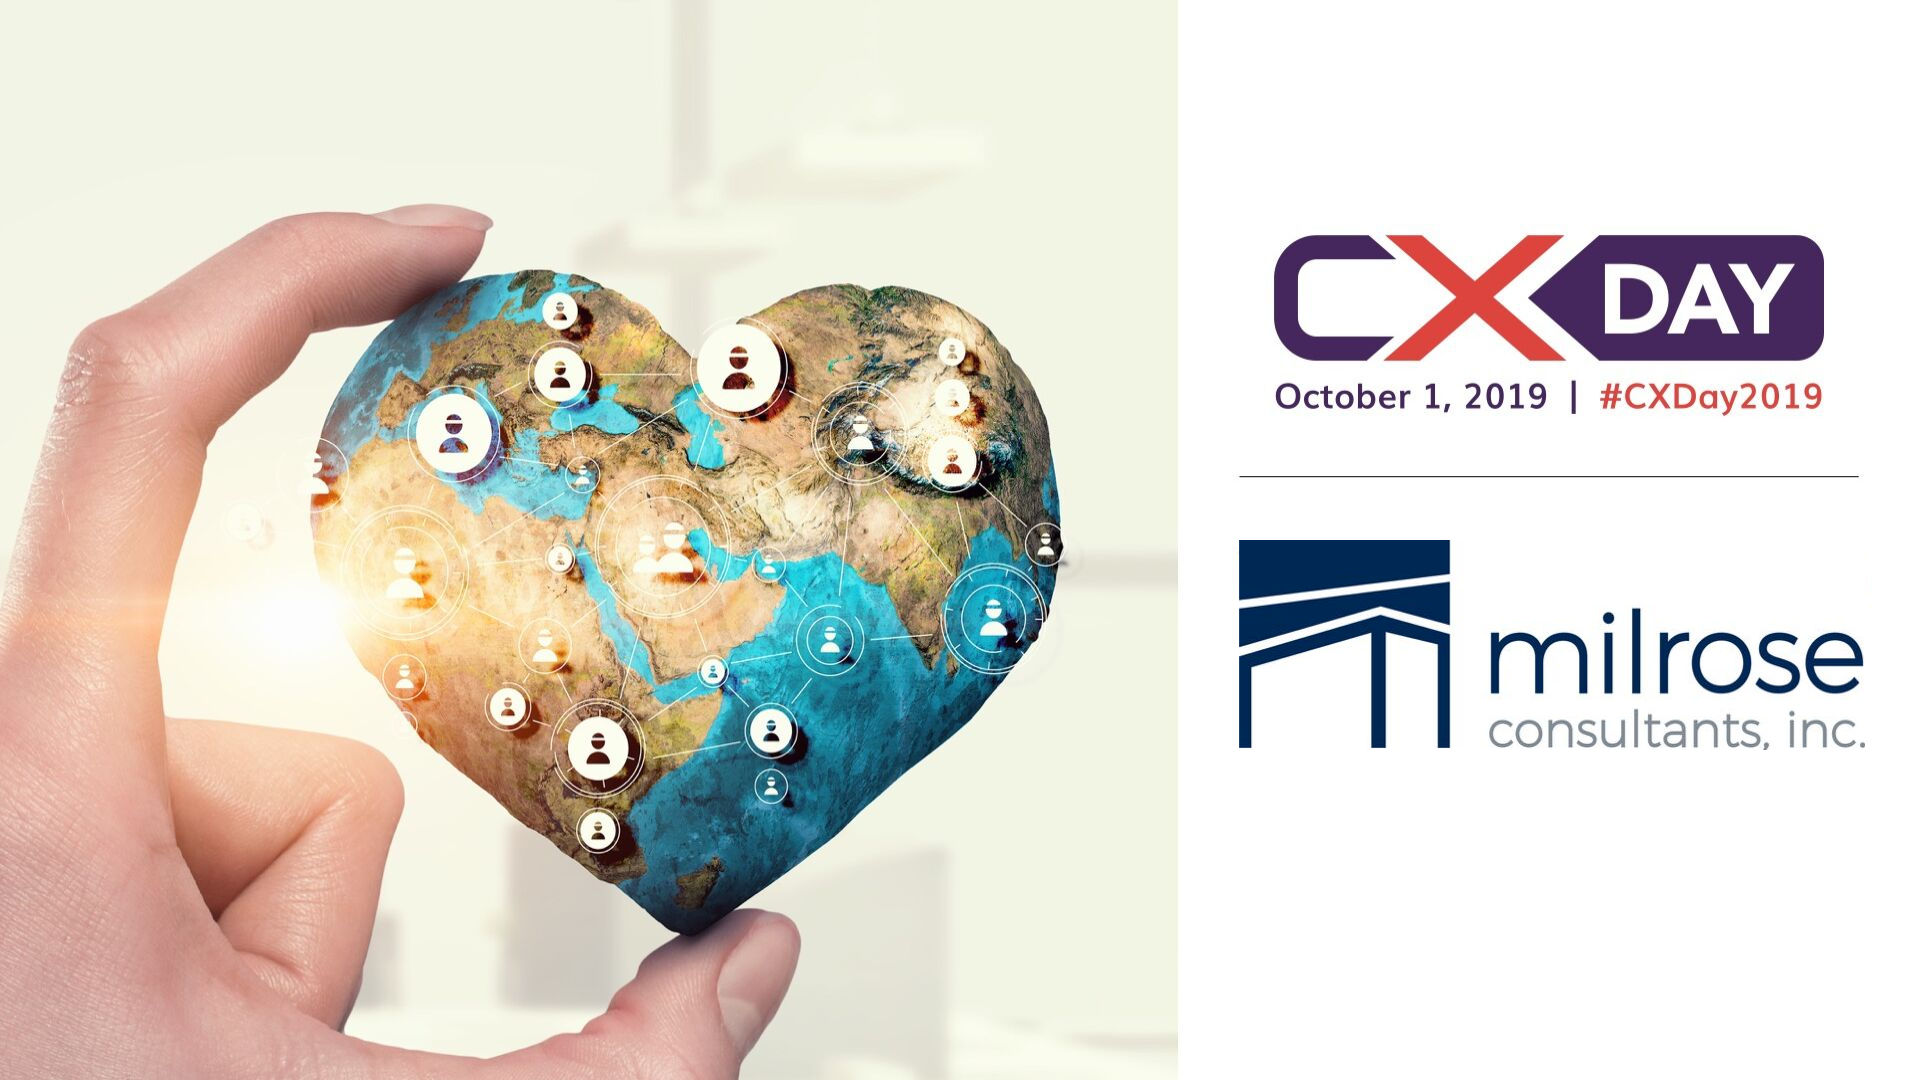 Join Milrose in celebrating Customer Experience (CX) Day